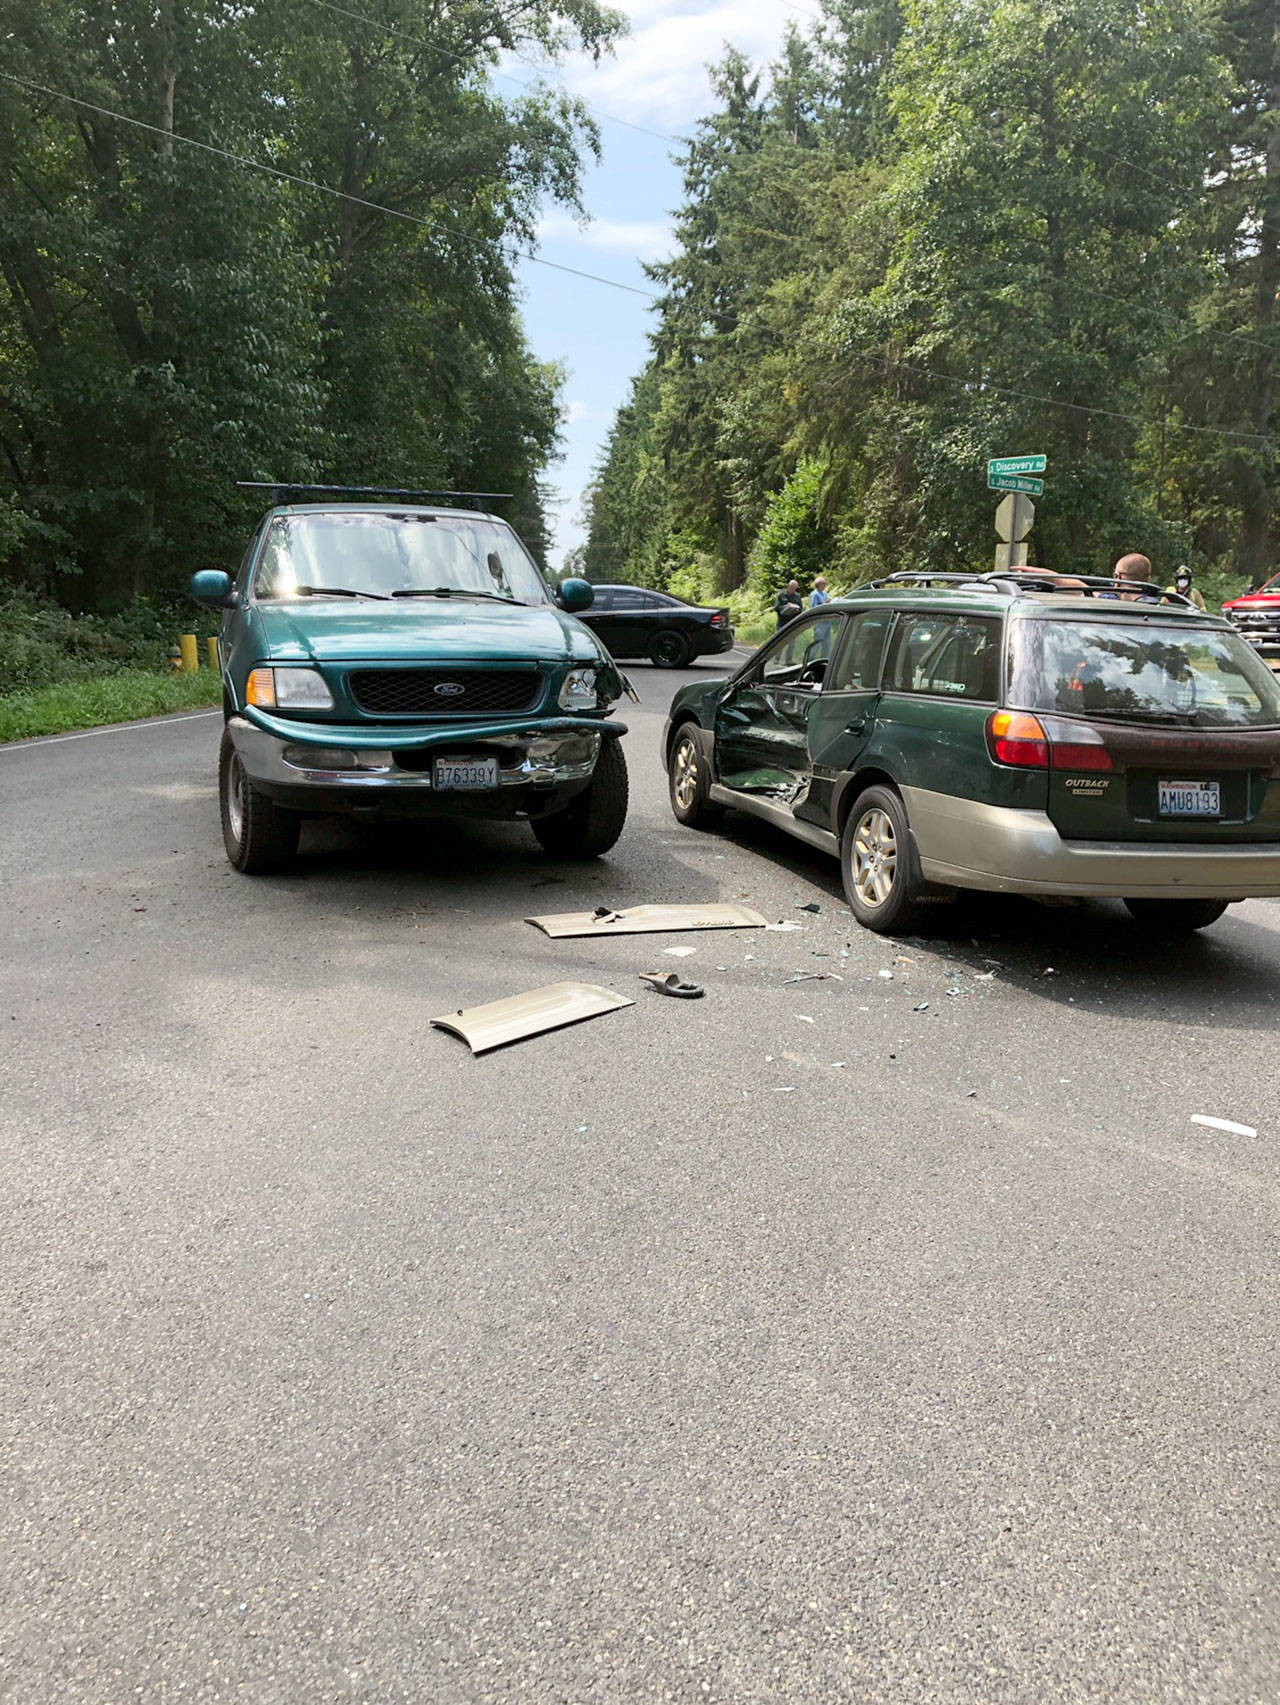 A crash between this Ford F150 and Subaru Legacy shut down traffic for about 40 minutes at the intersection of Jacob Miller Road and Discovery Bay Road. (Jefferson County Sheriffs Office)